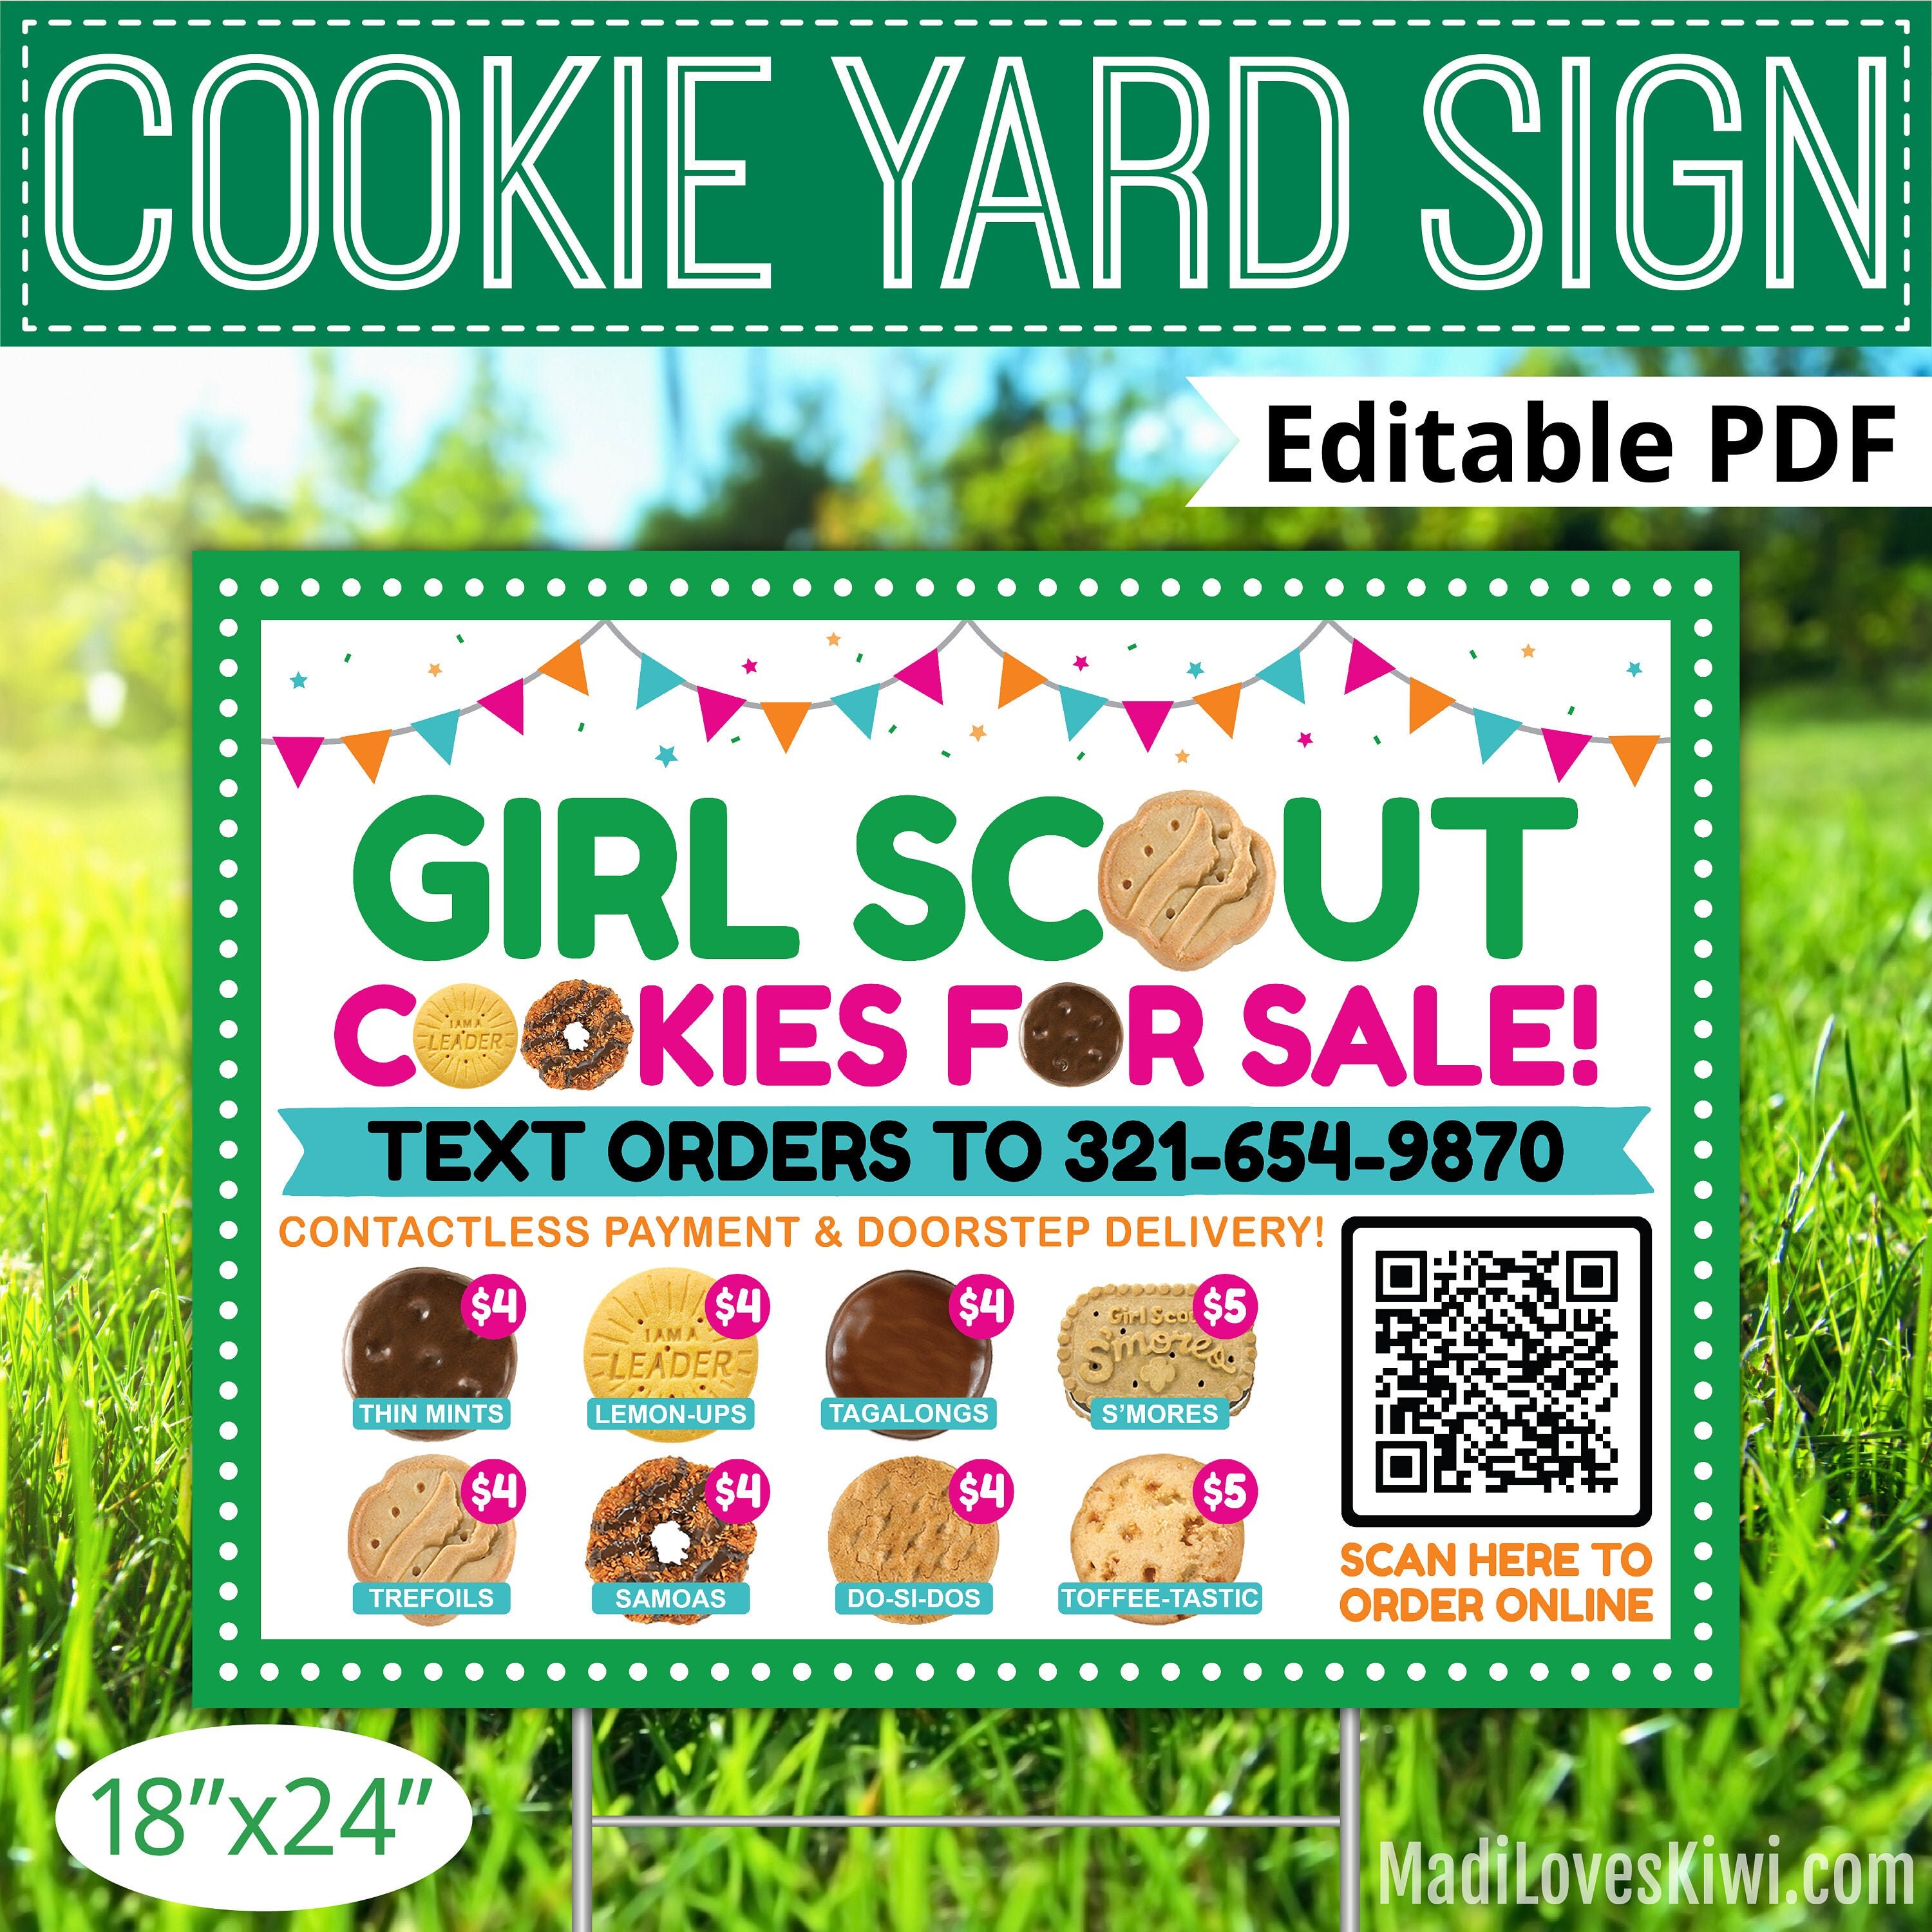 2021-lbb-girl-scout-yard-sign-with-qr-code-24x18-cookie-lawn-etsy